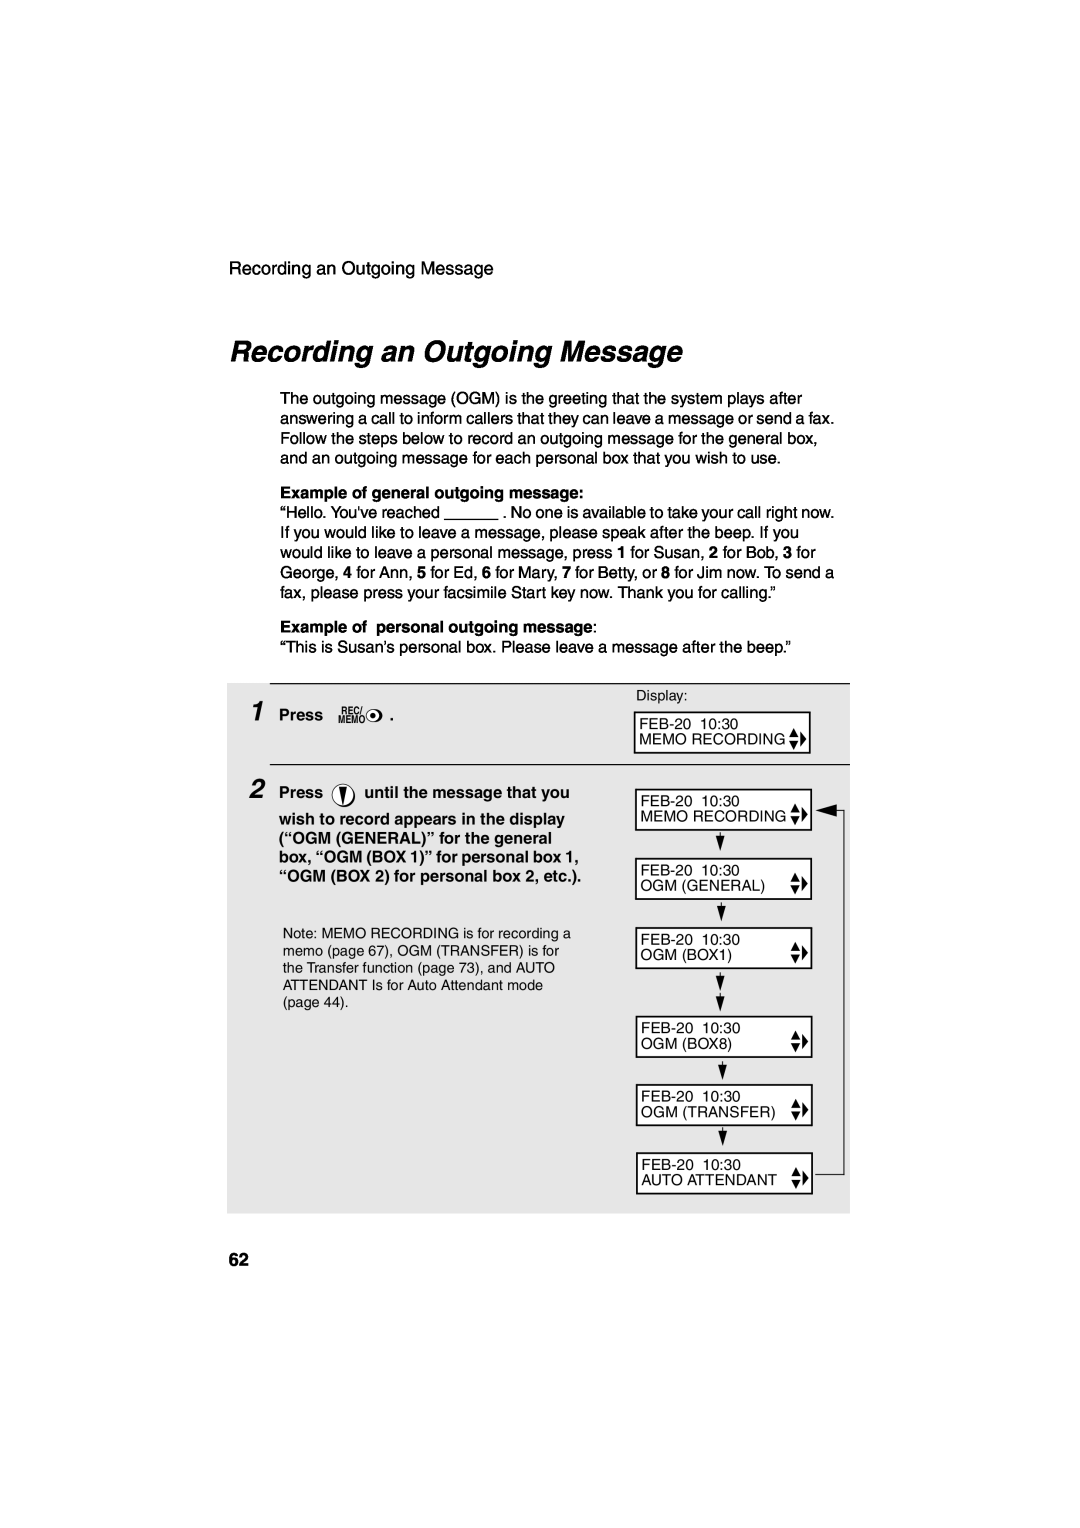 Sharp UX-CD600 operation manual Recording an Outgoing Message 